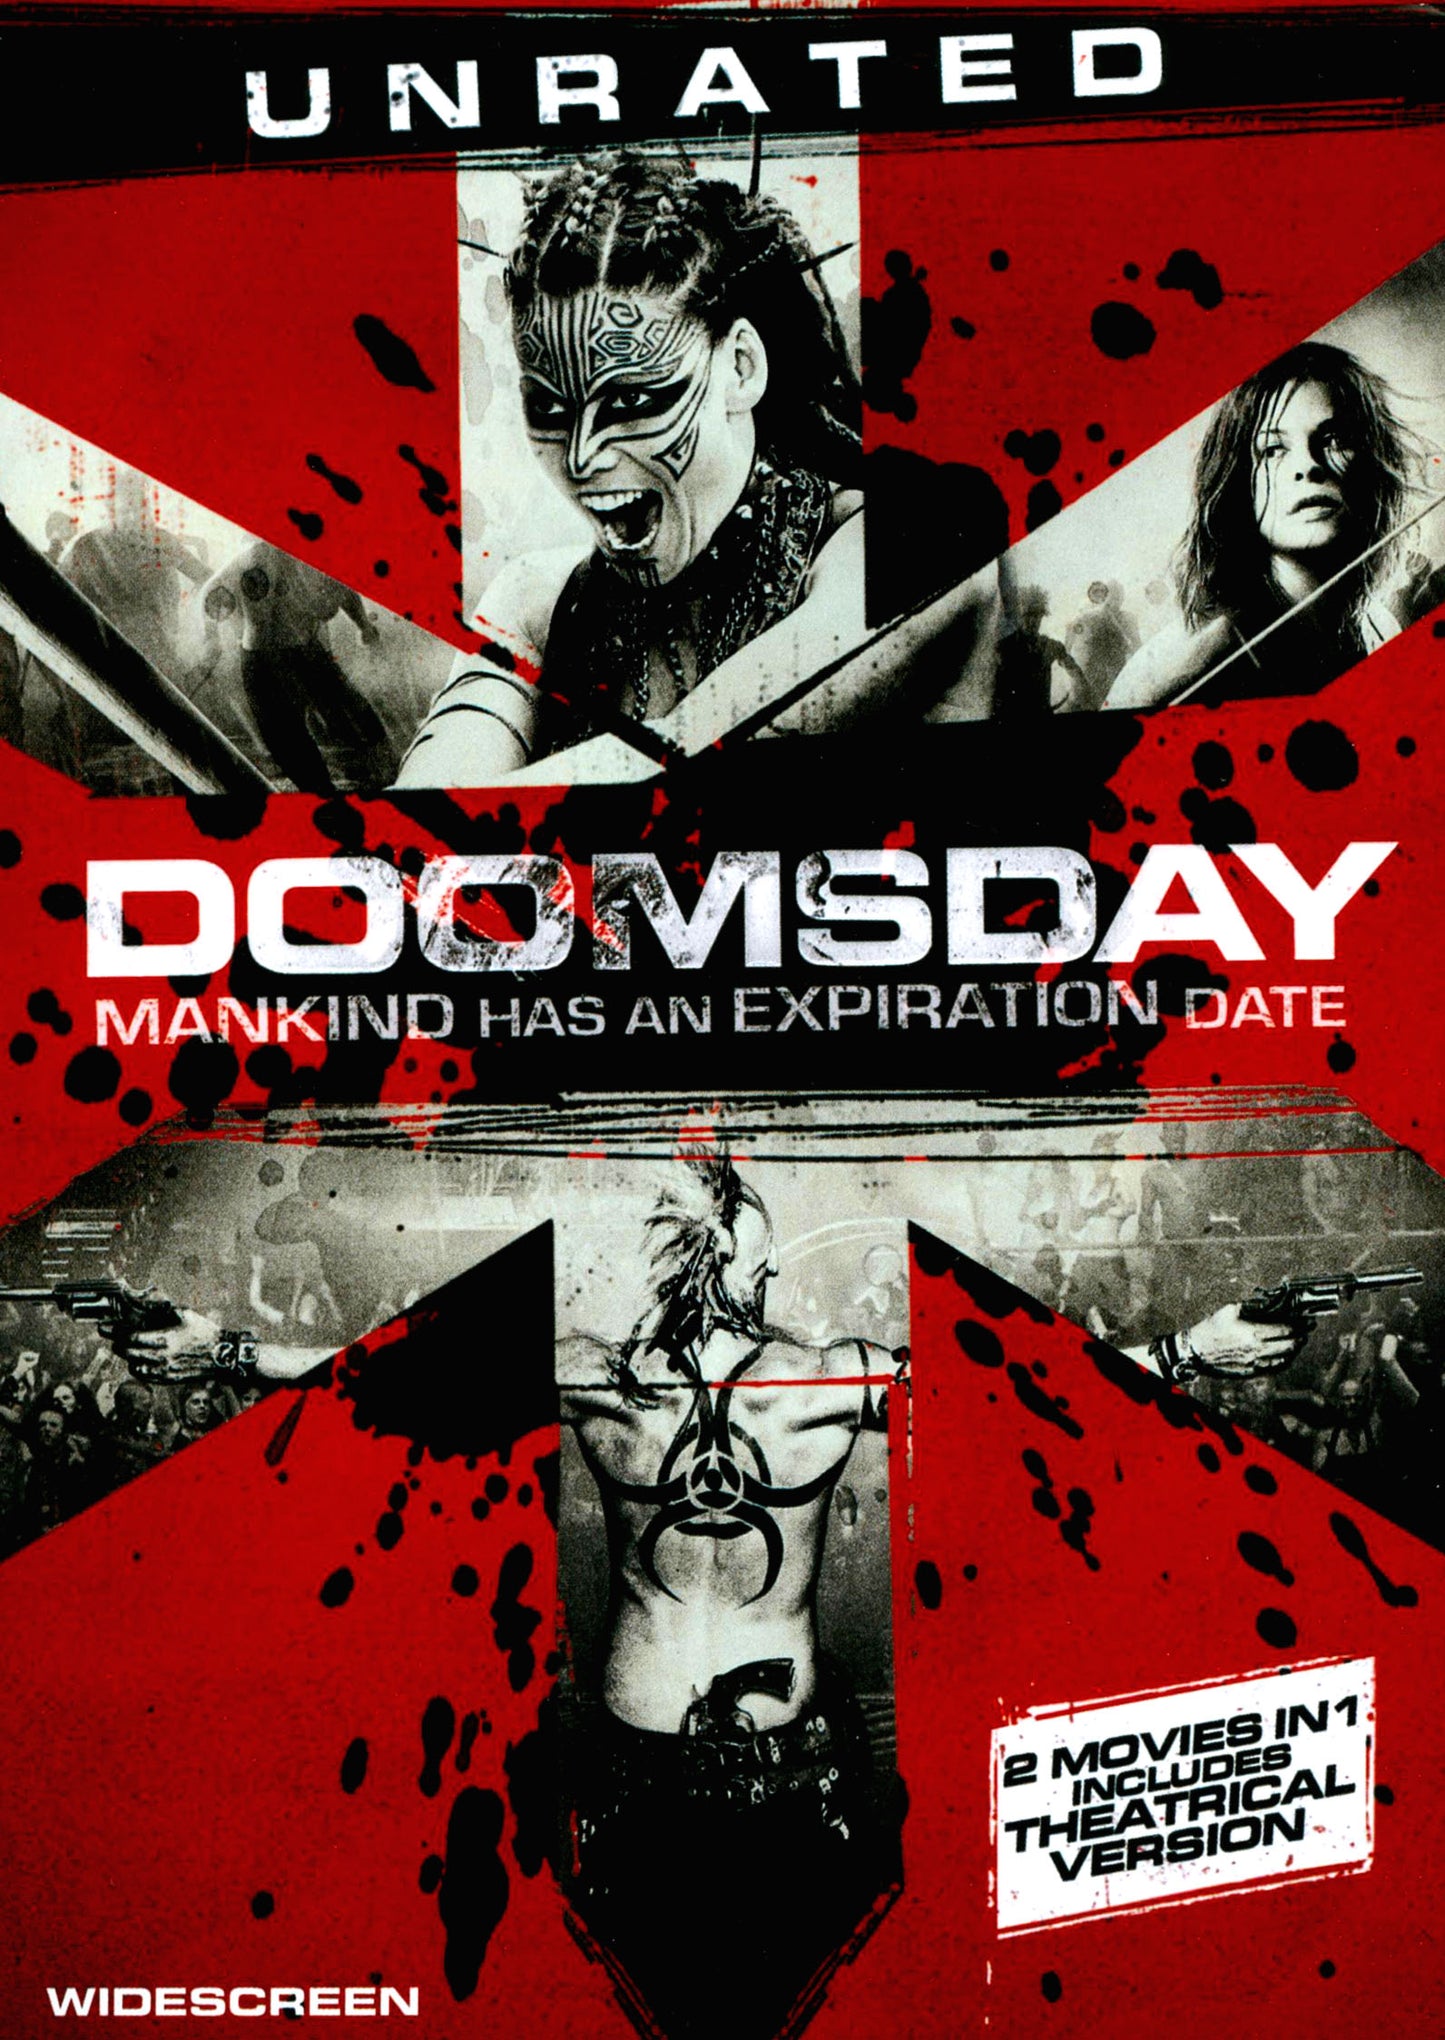 Doomsday: Unrated (USA Import) cover art